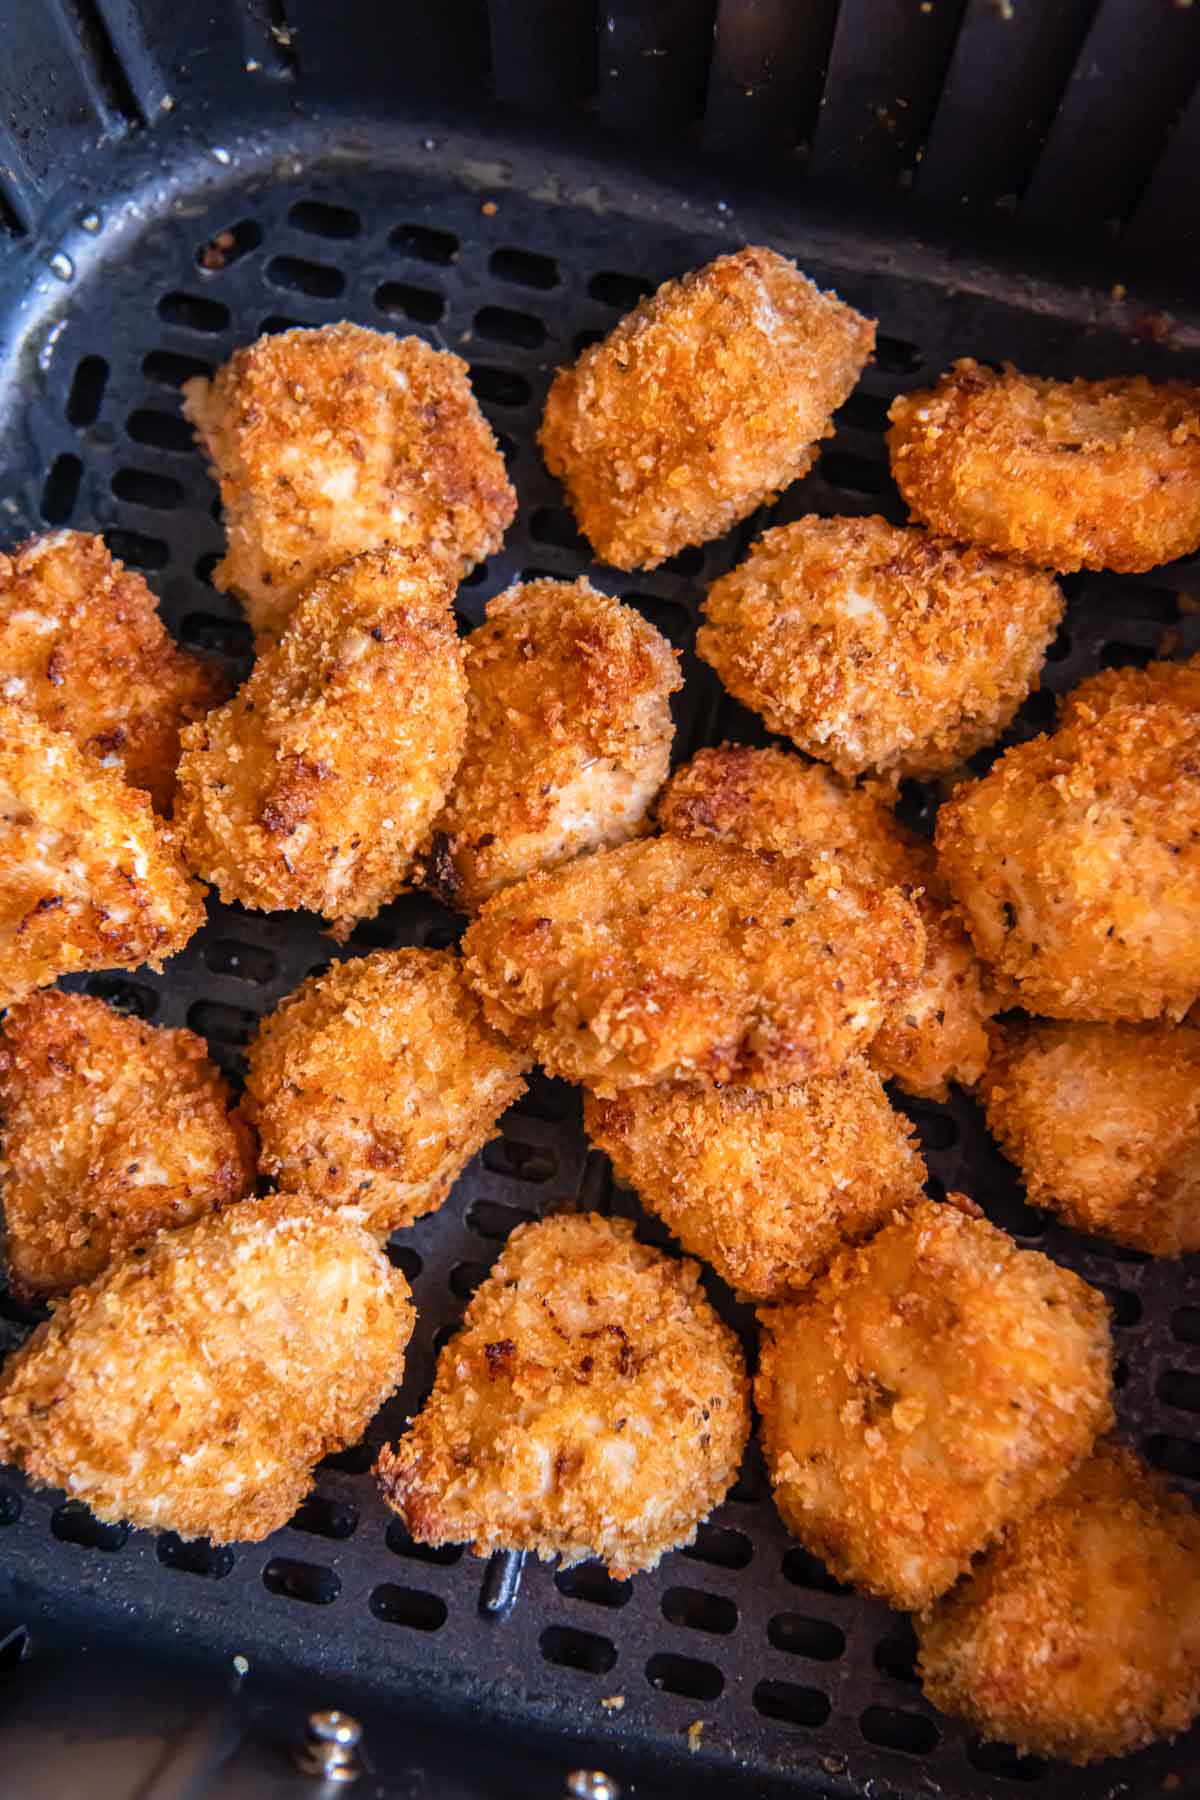 Cooked chicken nuggets stacked in air fryer basket.